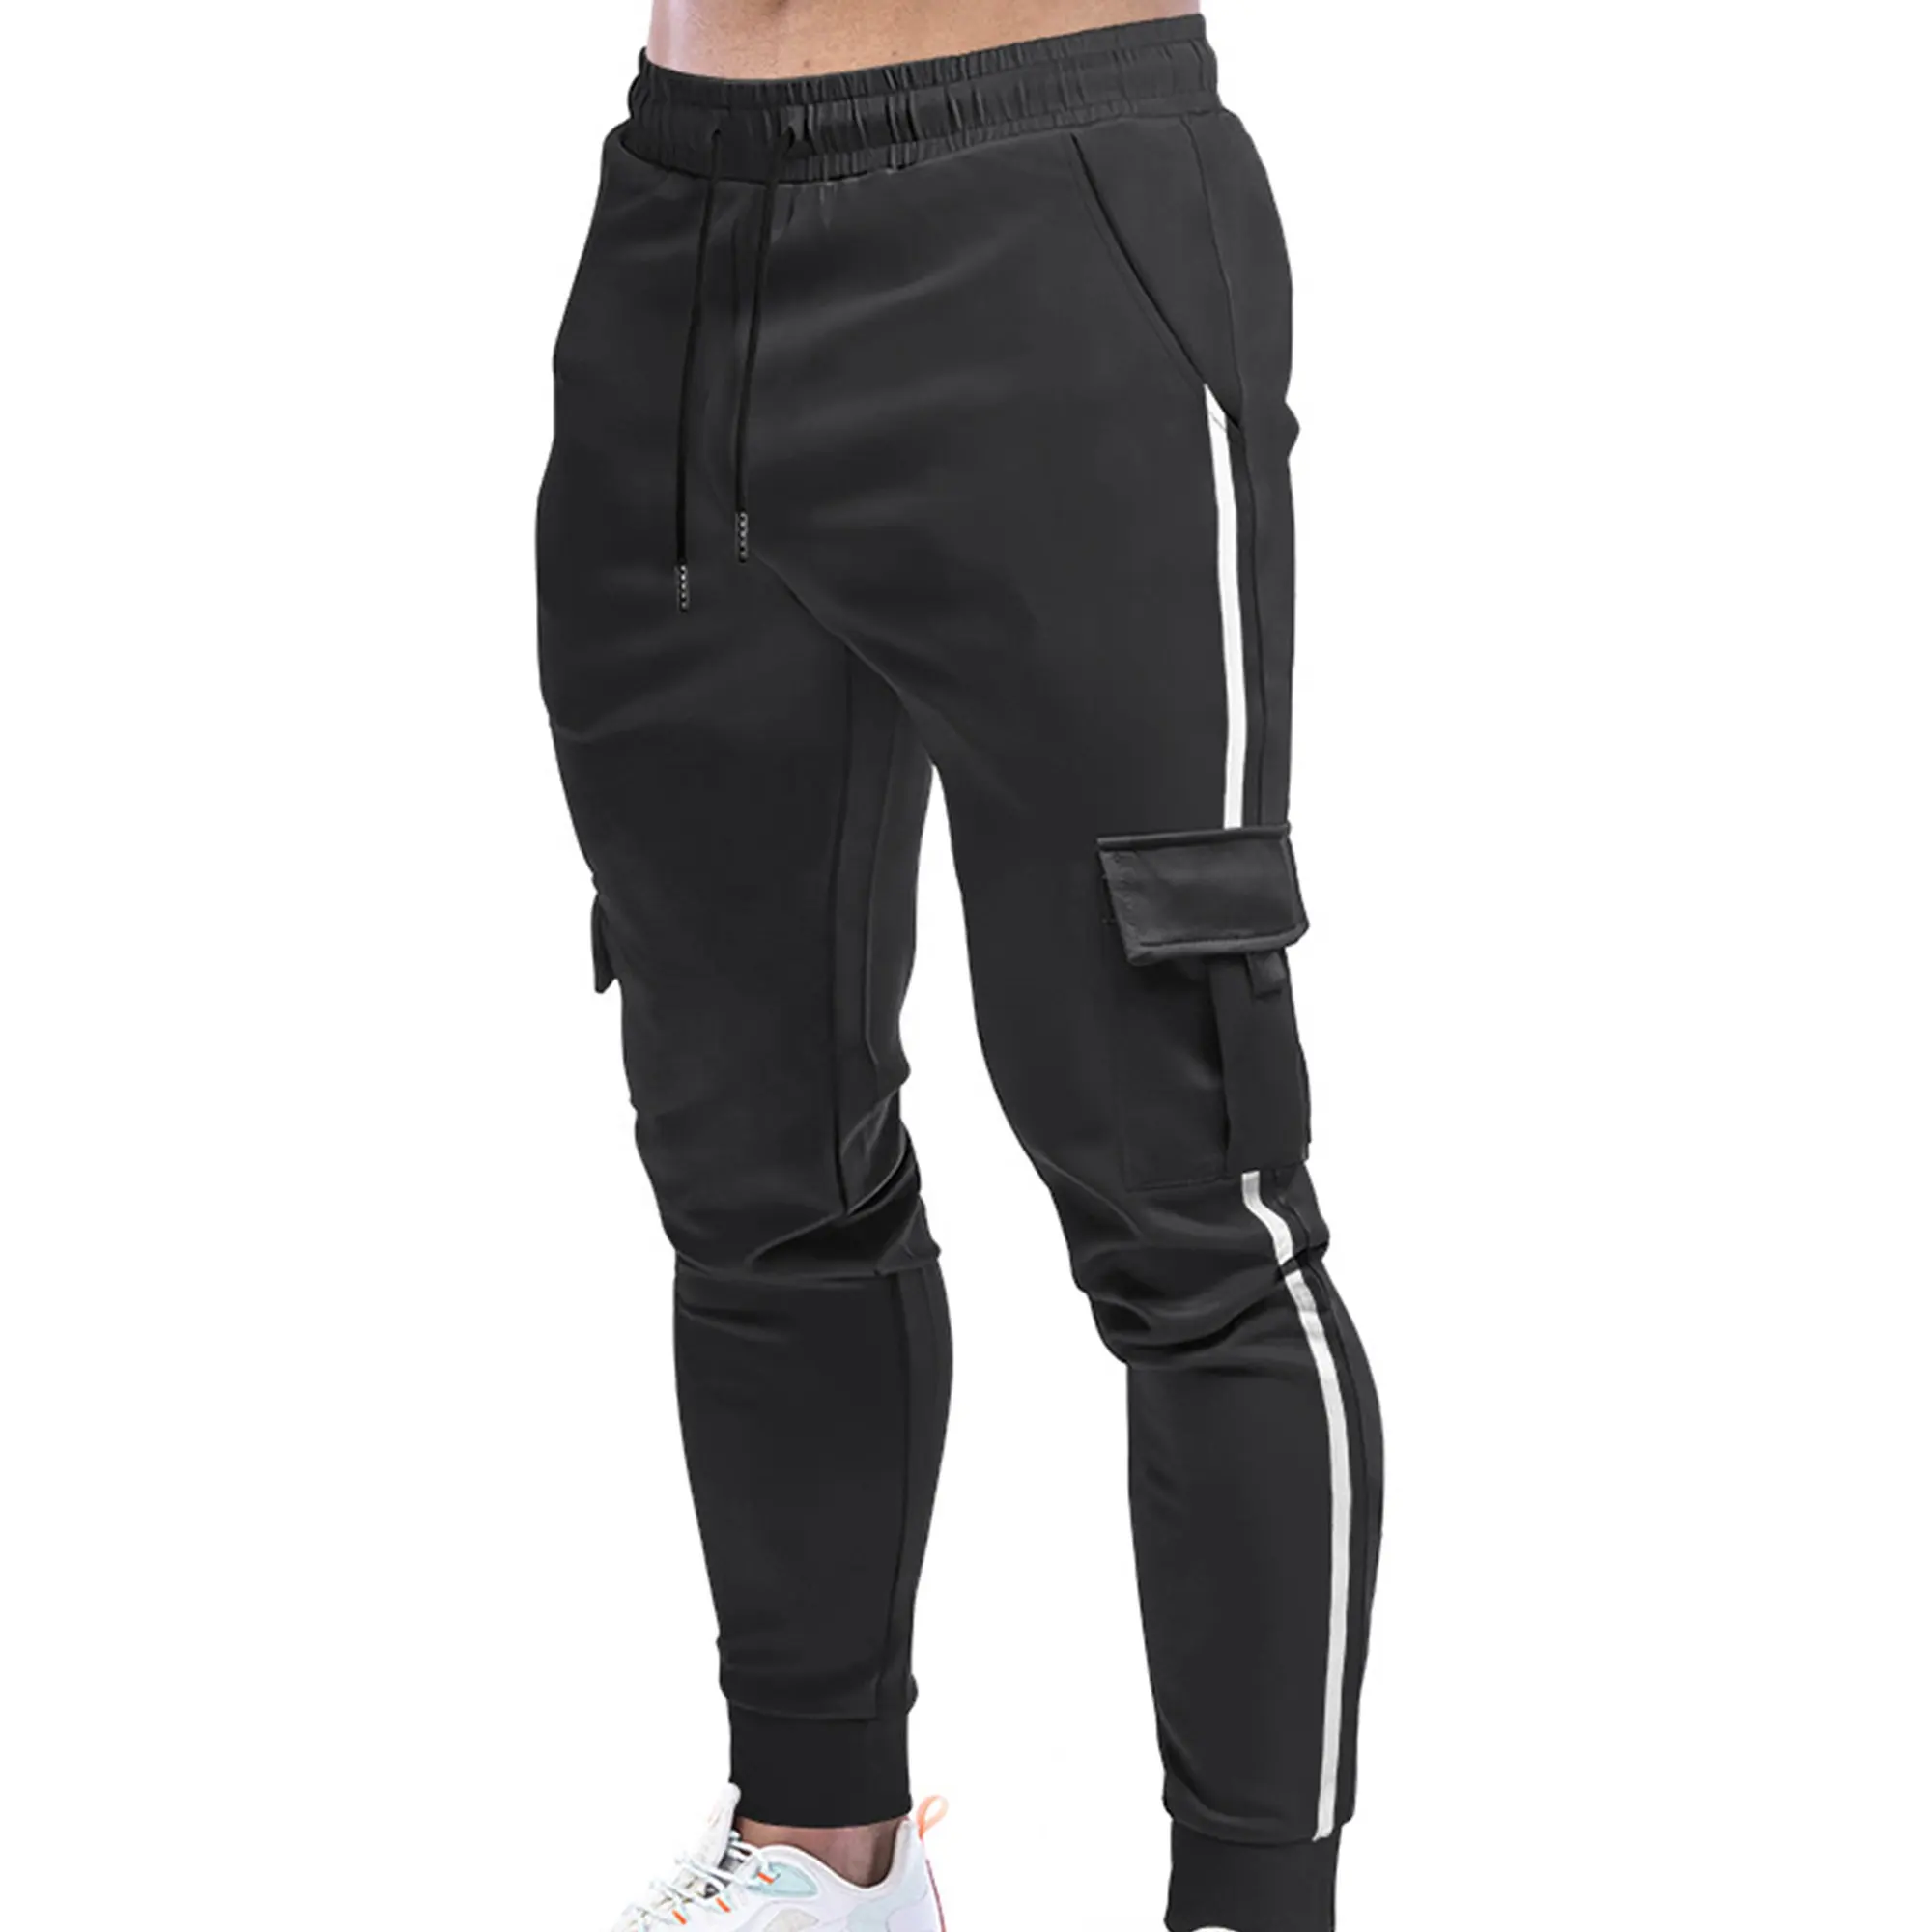 Customized Men's Large Drawstring Sport Pants With Pocket High Quality Plus Size Side Beaded Trousers Casual Jogging Pant